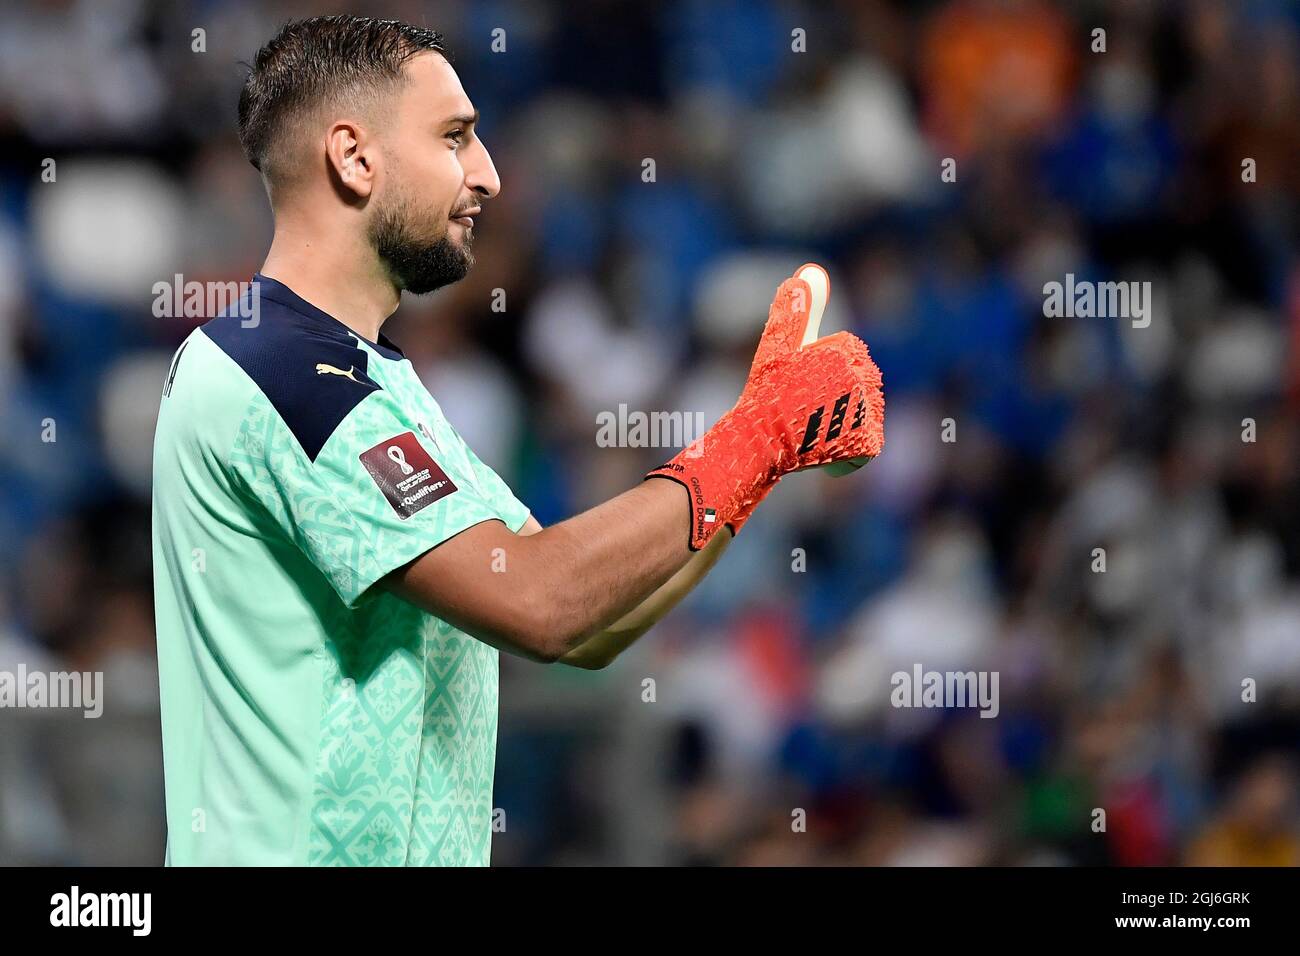 Gianluigi Donnarumma of Italy reacts during the Qatar 2022 world cup qualifying football match between Italy and Lithuania at Citta del tricolore stadium in Reggio Emilia (Italy), September 8th, 2021. Photo Andrea